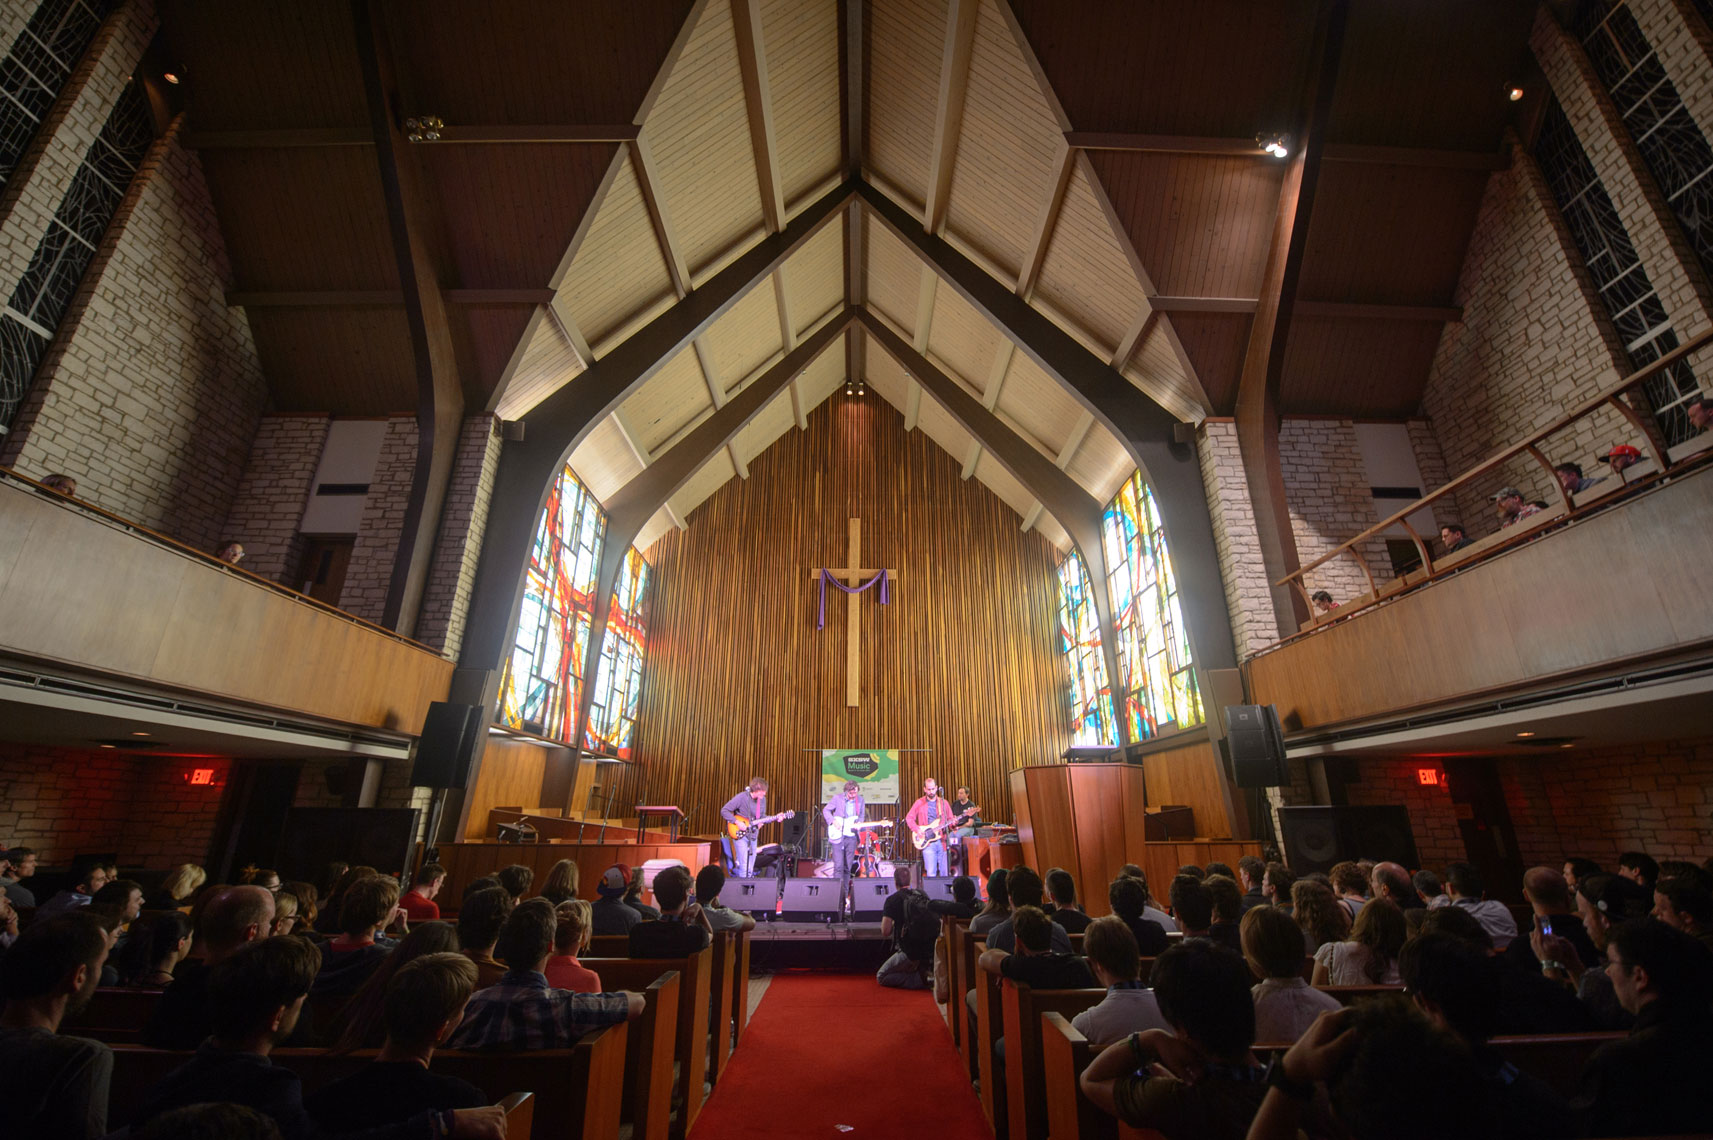 Real-Estate-performs-at-the-Central-Presbyterian-Church-for-the-Pitchfork-showcase-during-SXSW-2014-2